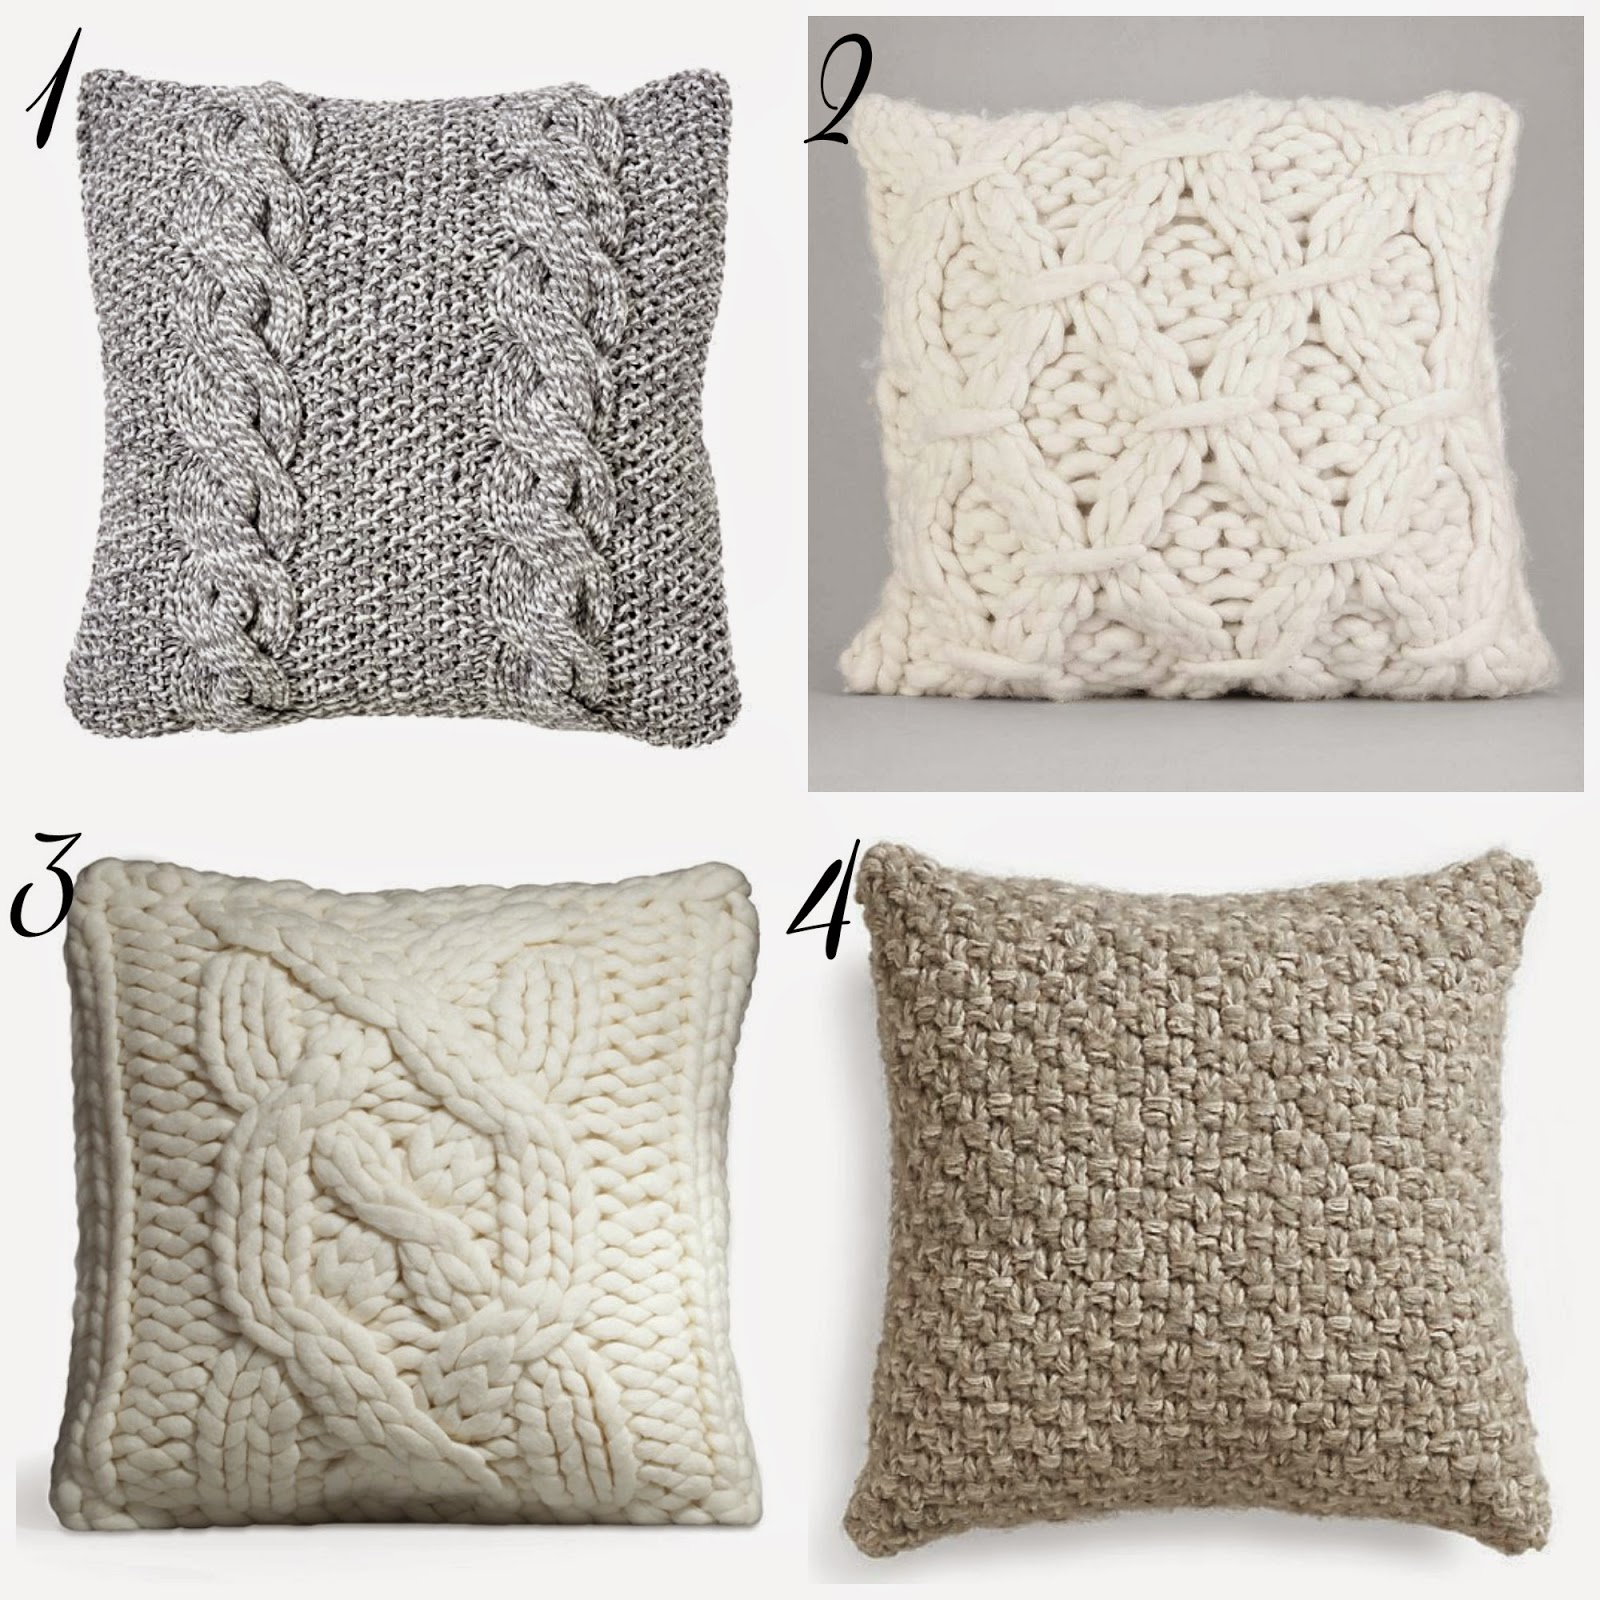 Knitting Pattern For Cushion Cover With Cables Cable Knit Throw Pillow Pattern Photos Table And Pillow